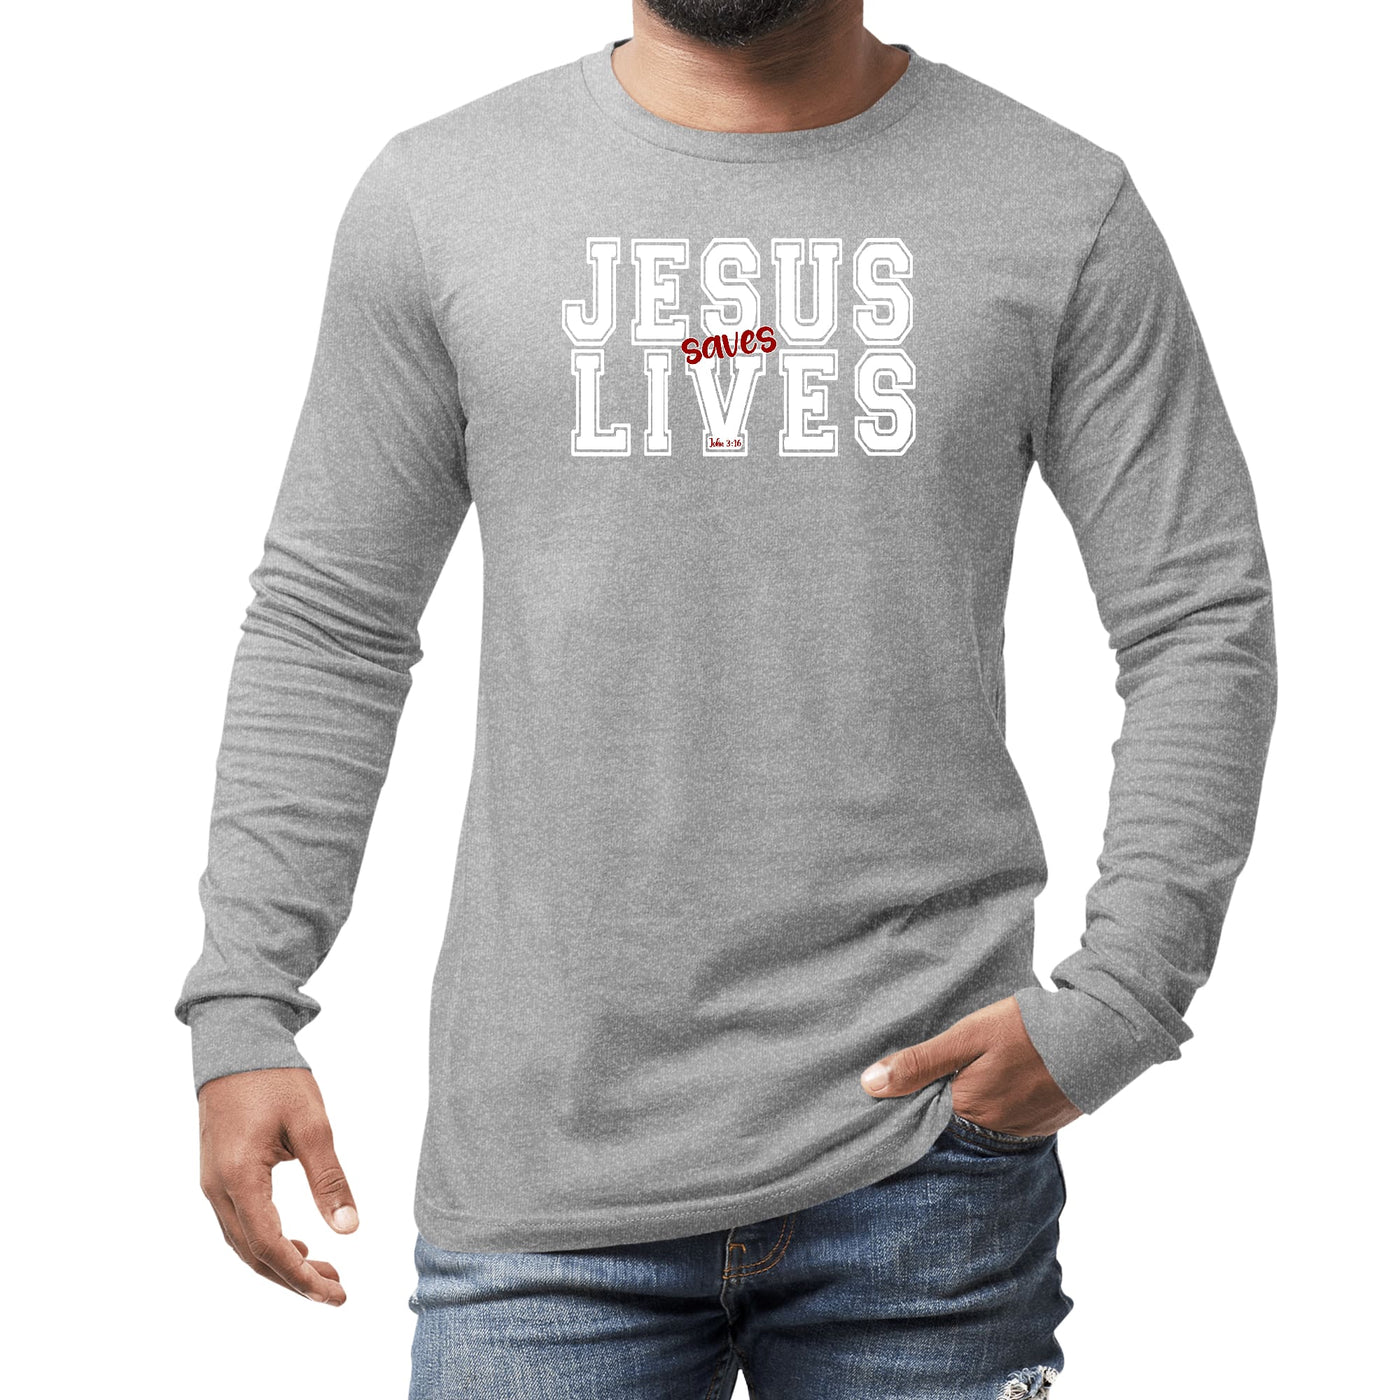 Mens Long Sleeve Graphic T-shirt Jesus Saves Lives White Red - Unisex